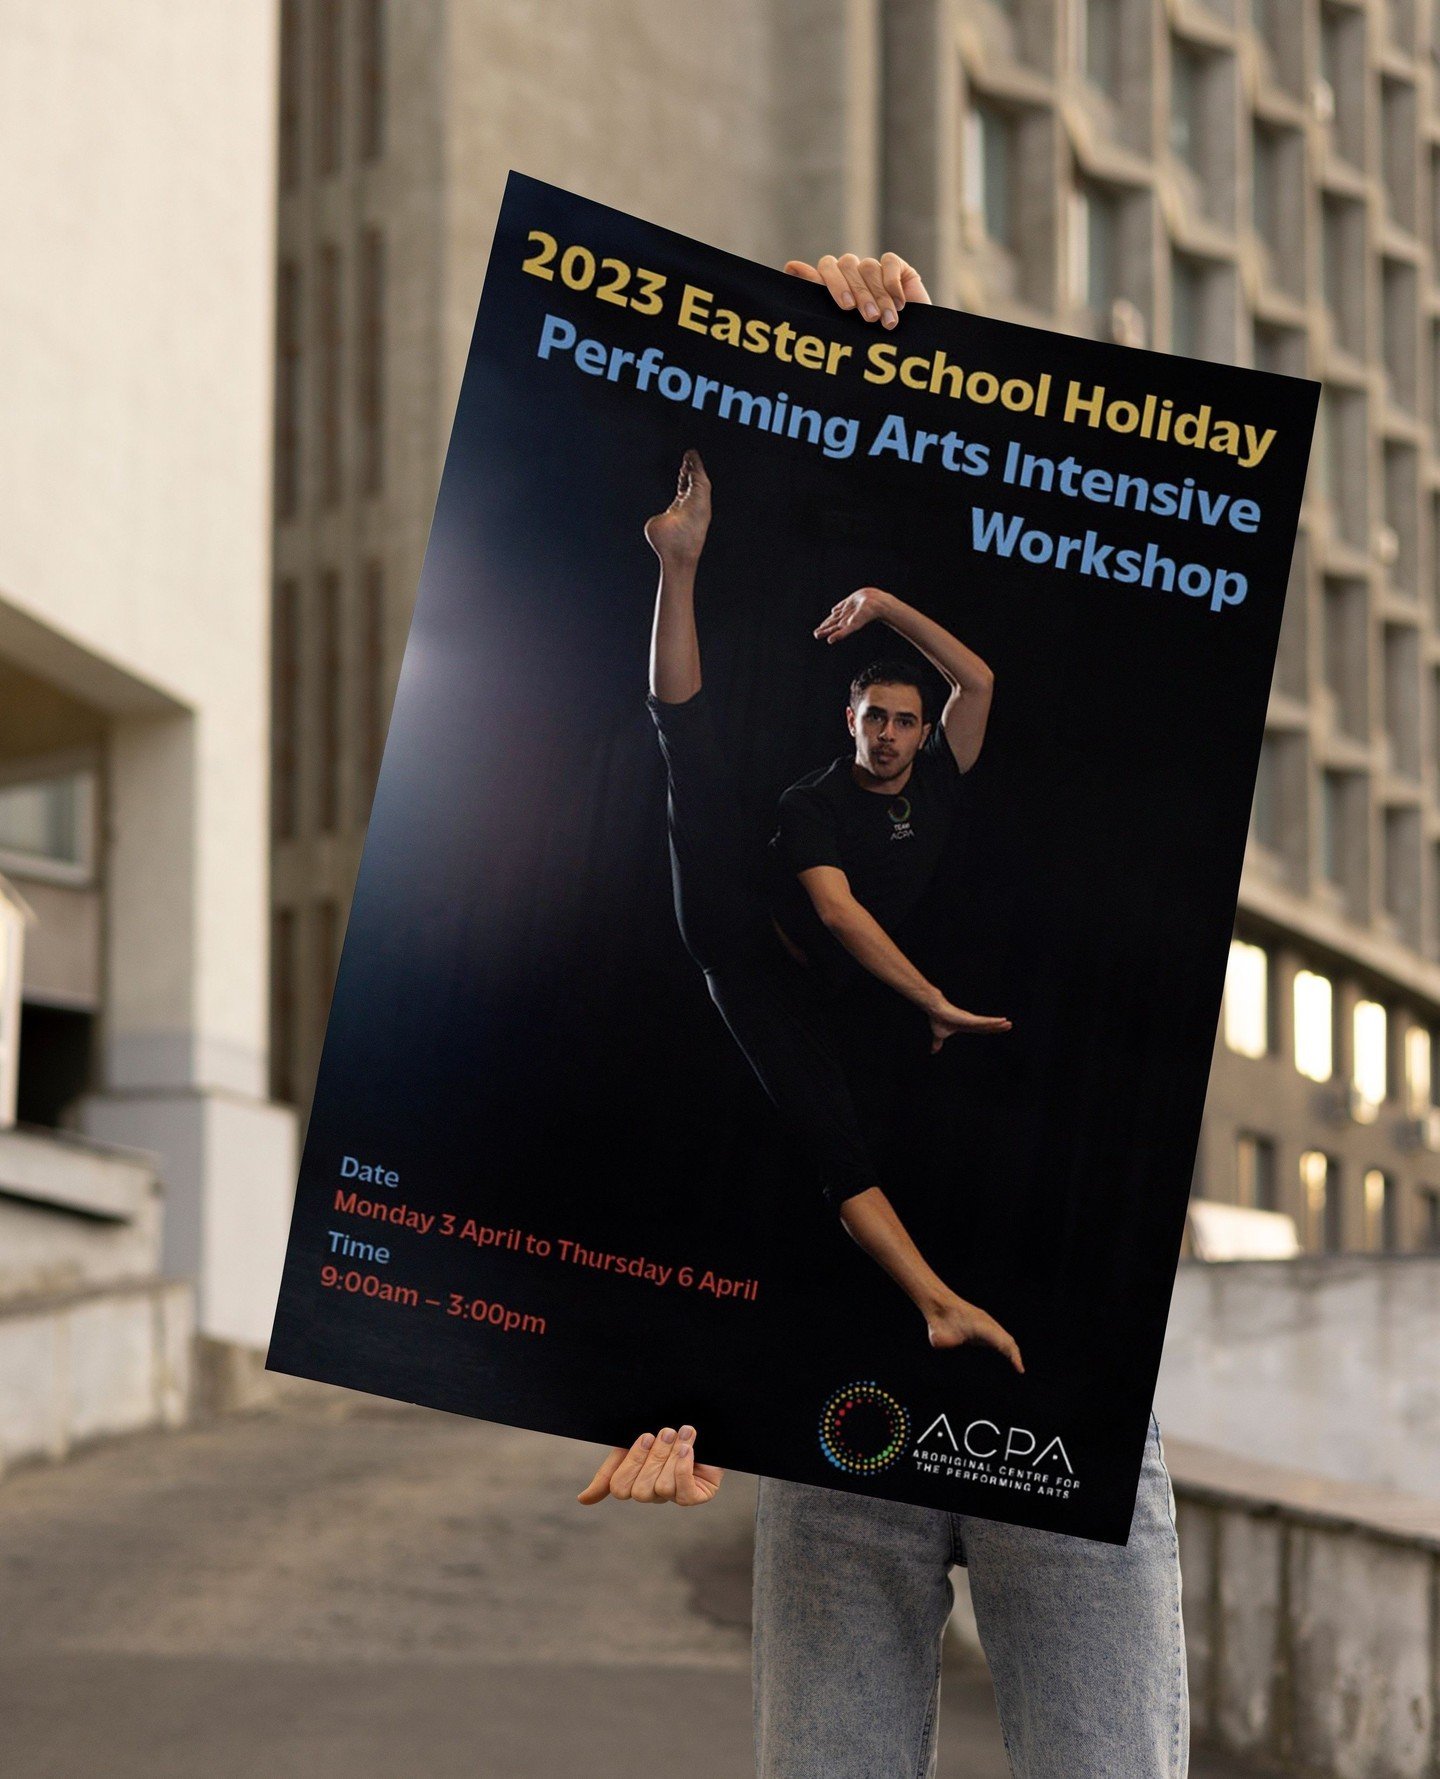 from last year's portfolio...⁠
⁠
a 2-sided informational poster the team created to get students excited about joining ACPA's 2023 Easter School Holiday Performing Arts Intensive Workshop.⁠
⁠
#RukkusCo